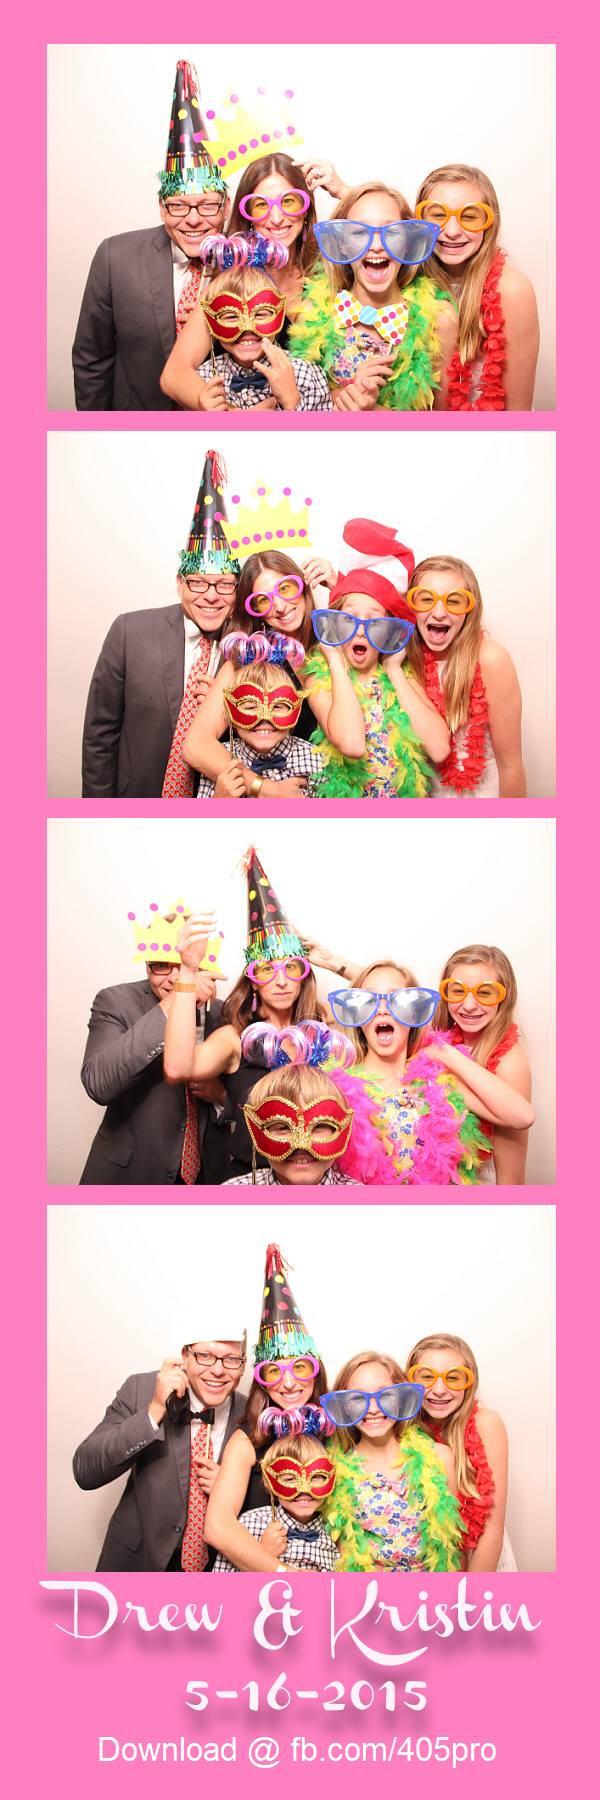 Oklahoma Midwest City Photo Booth Rentals The Manor At Coffee Creek